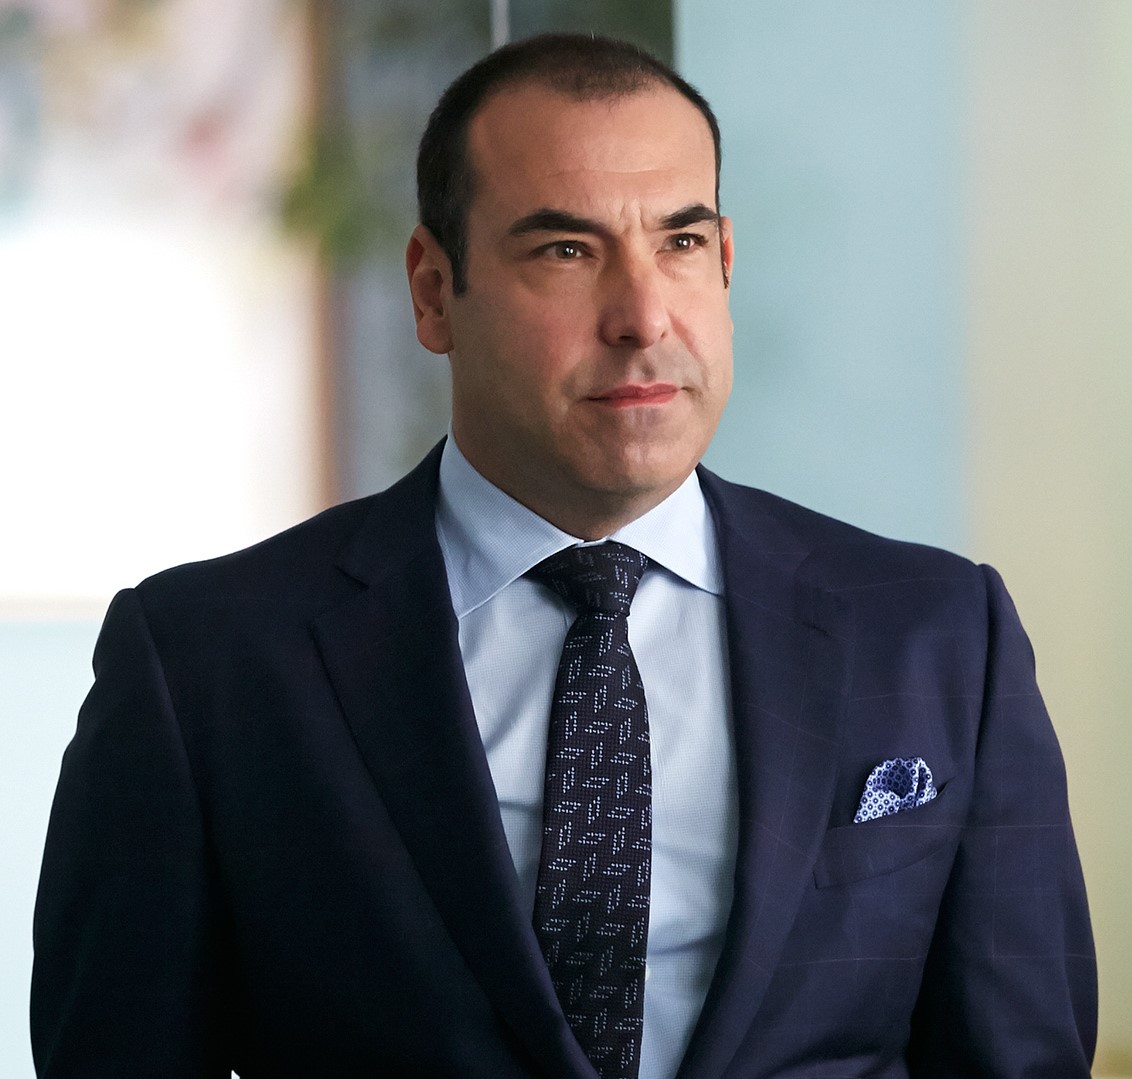 Louis_Litt_-_USA_Network_Promotional_Photo_(2) - Personology and Relational Science